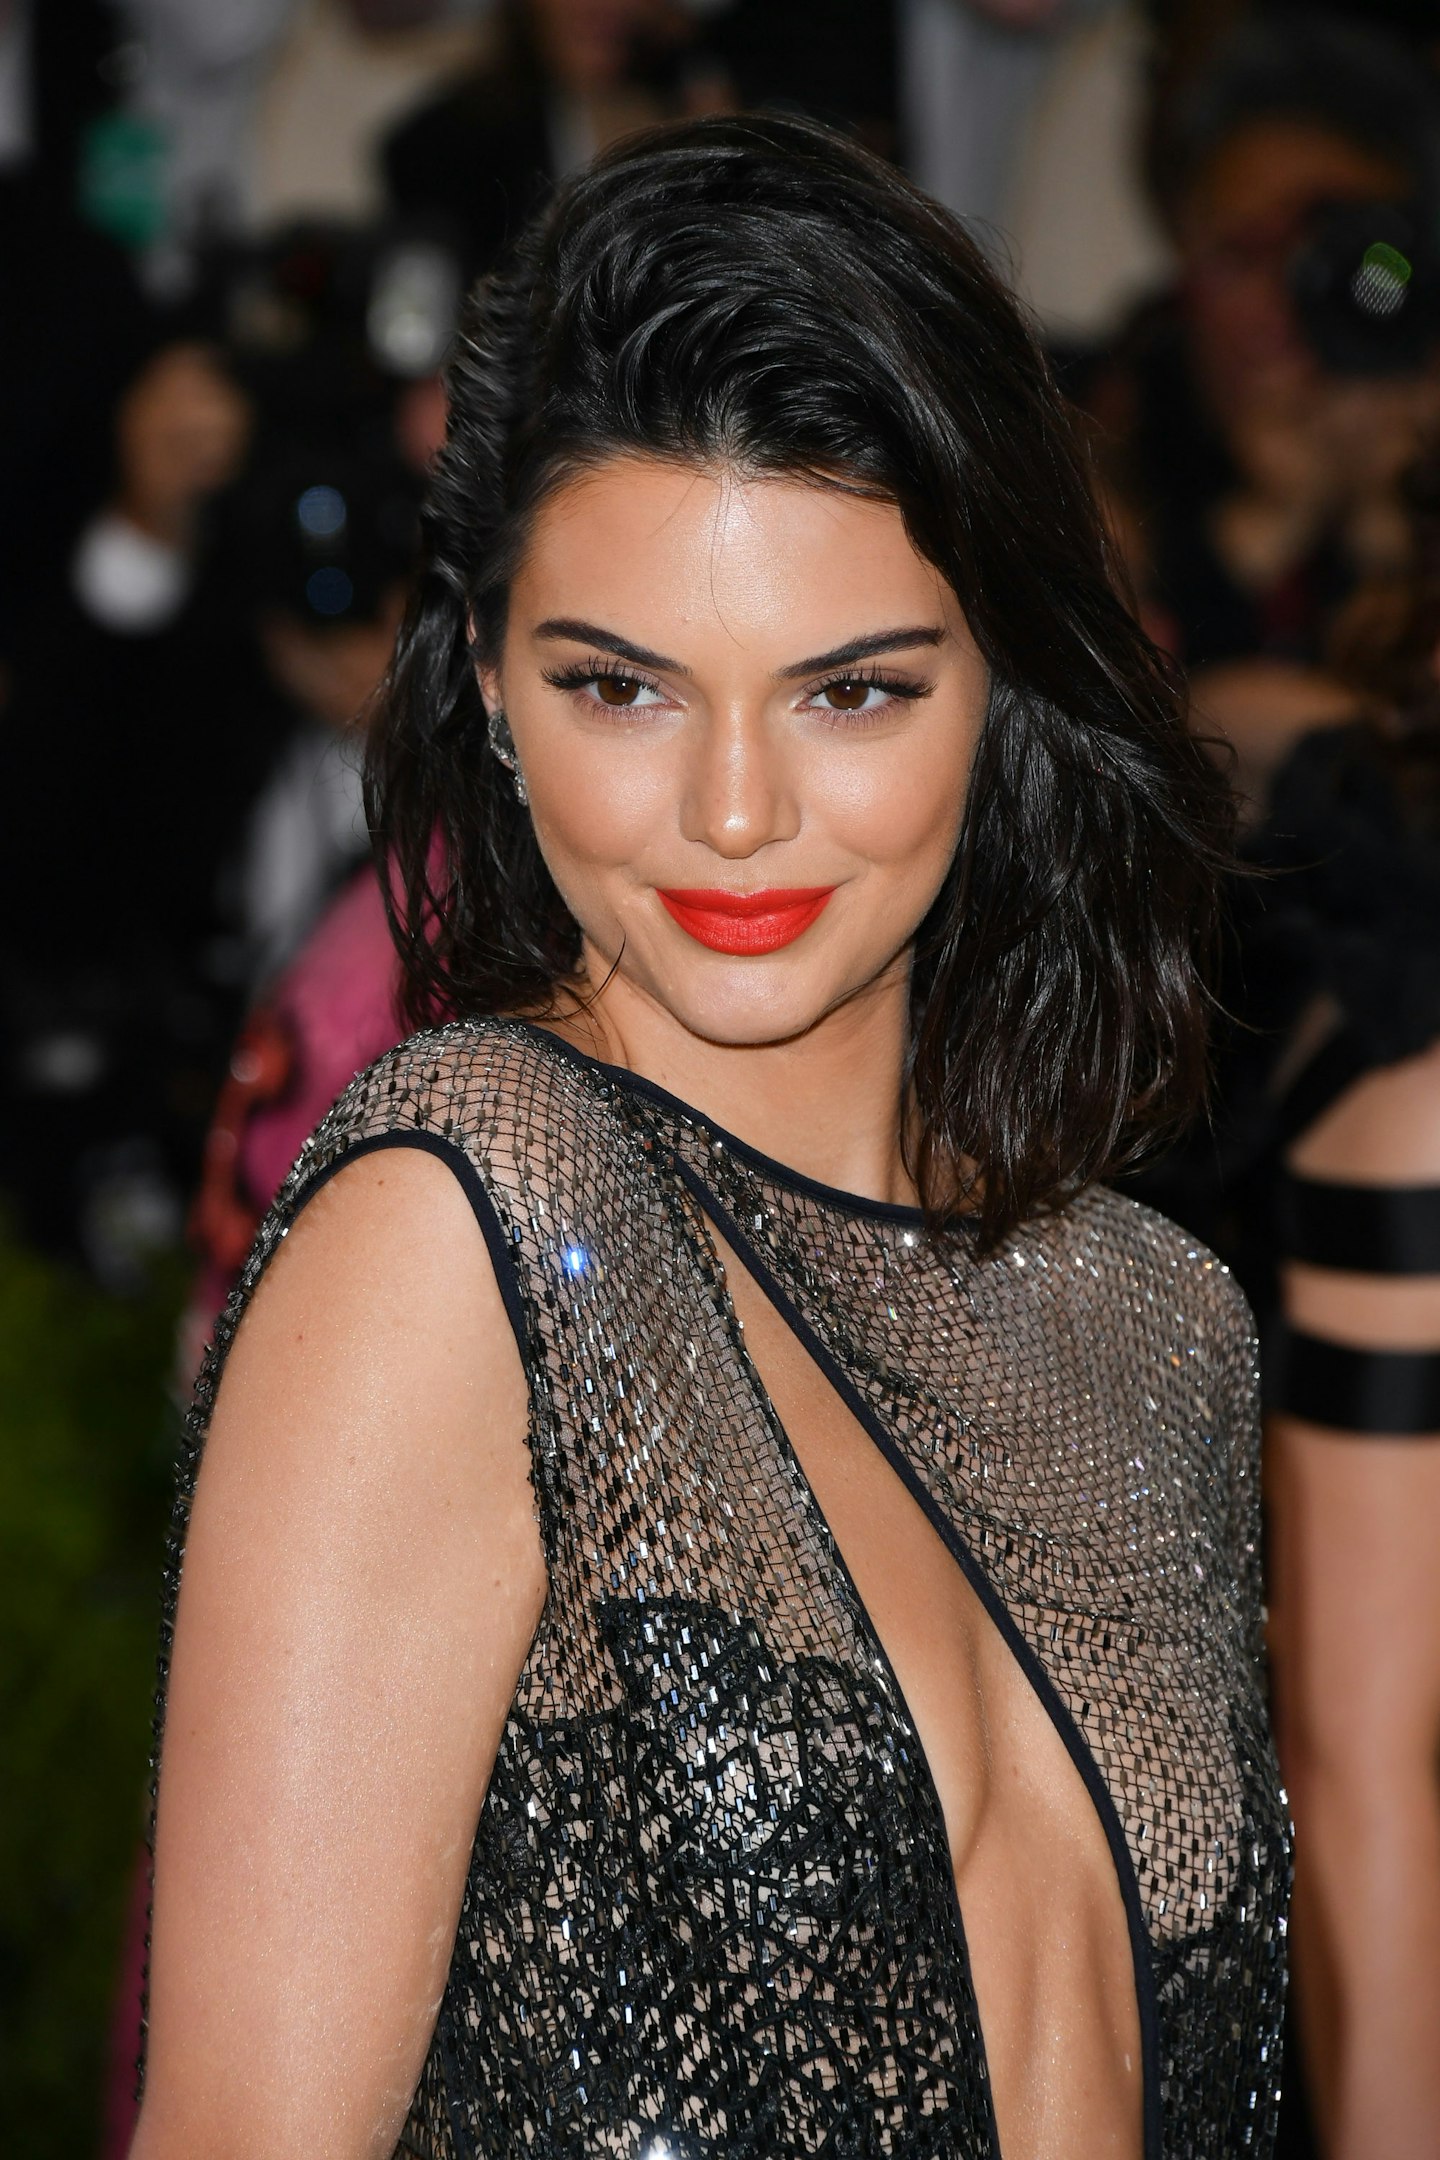 Kendall Jenner at the Met Gala 2017